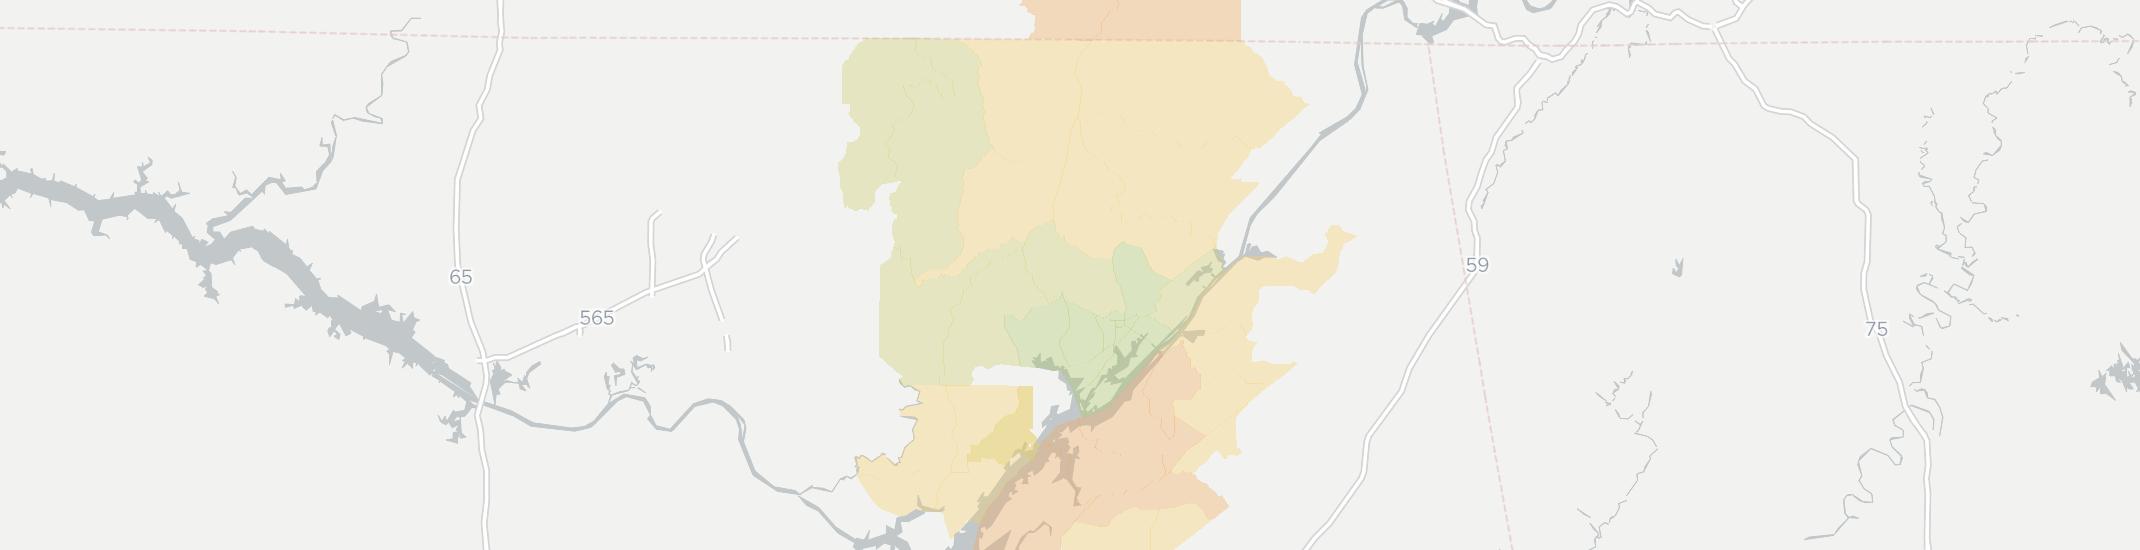 Scottsboro Internet Competition Map. Click for interactive map